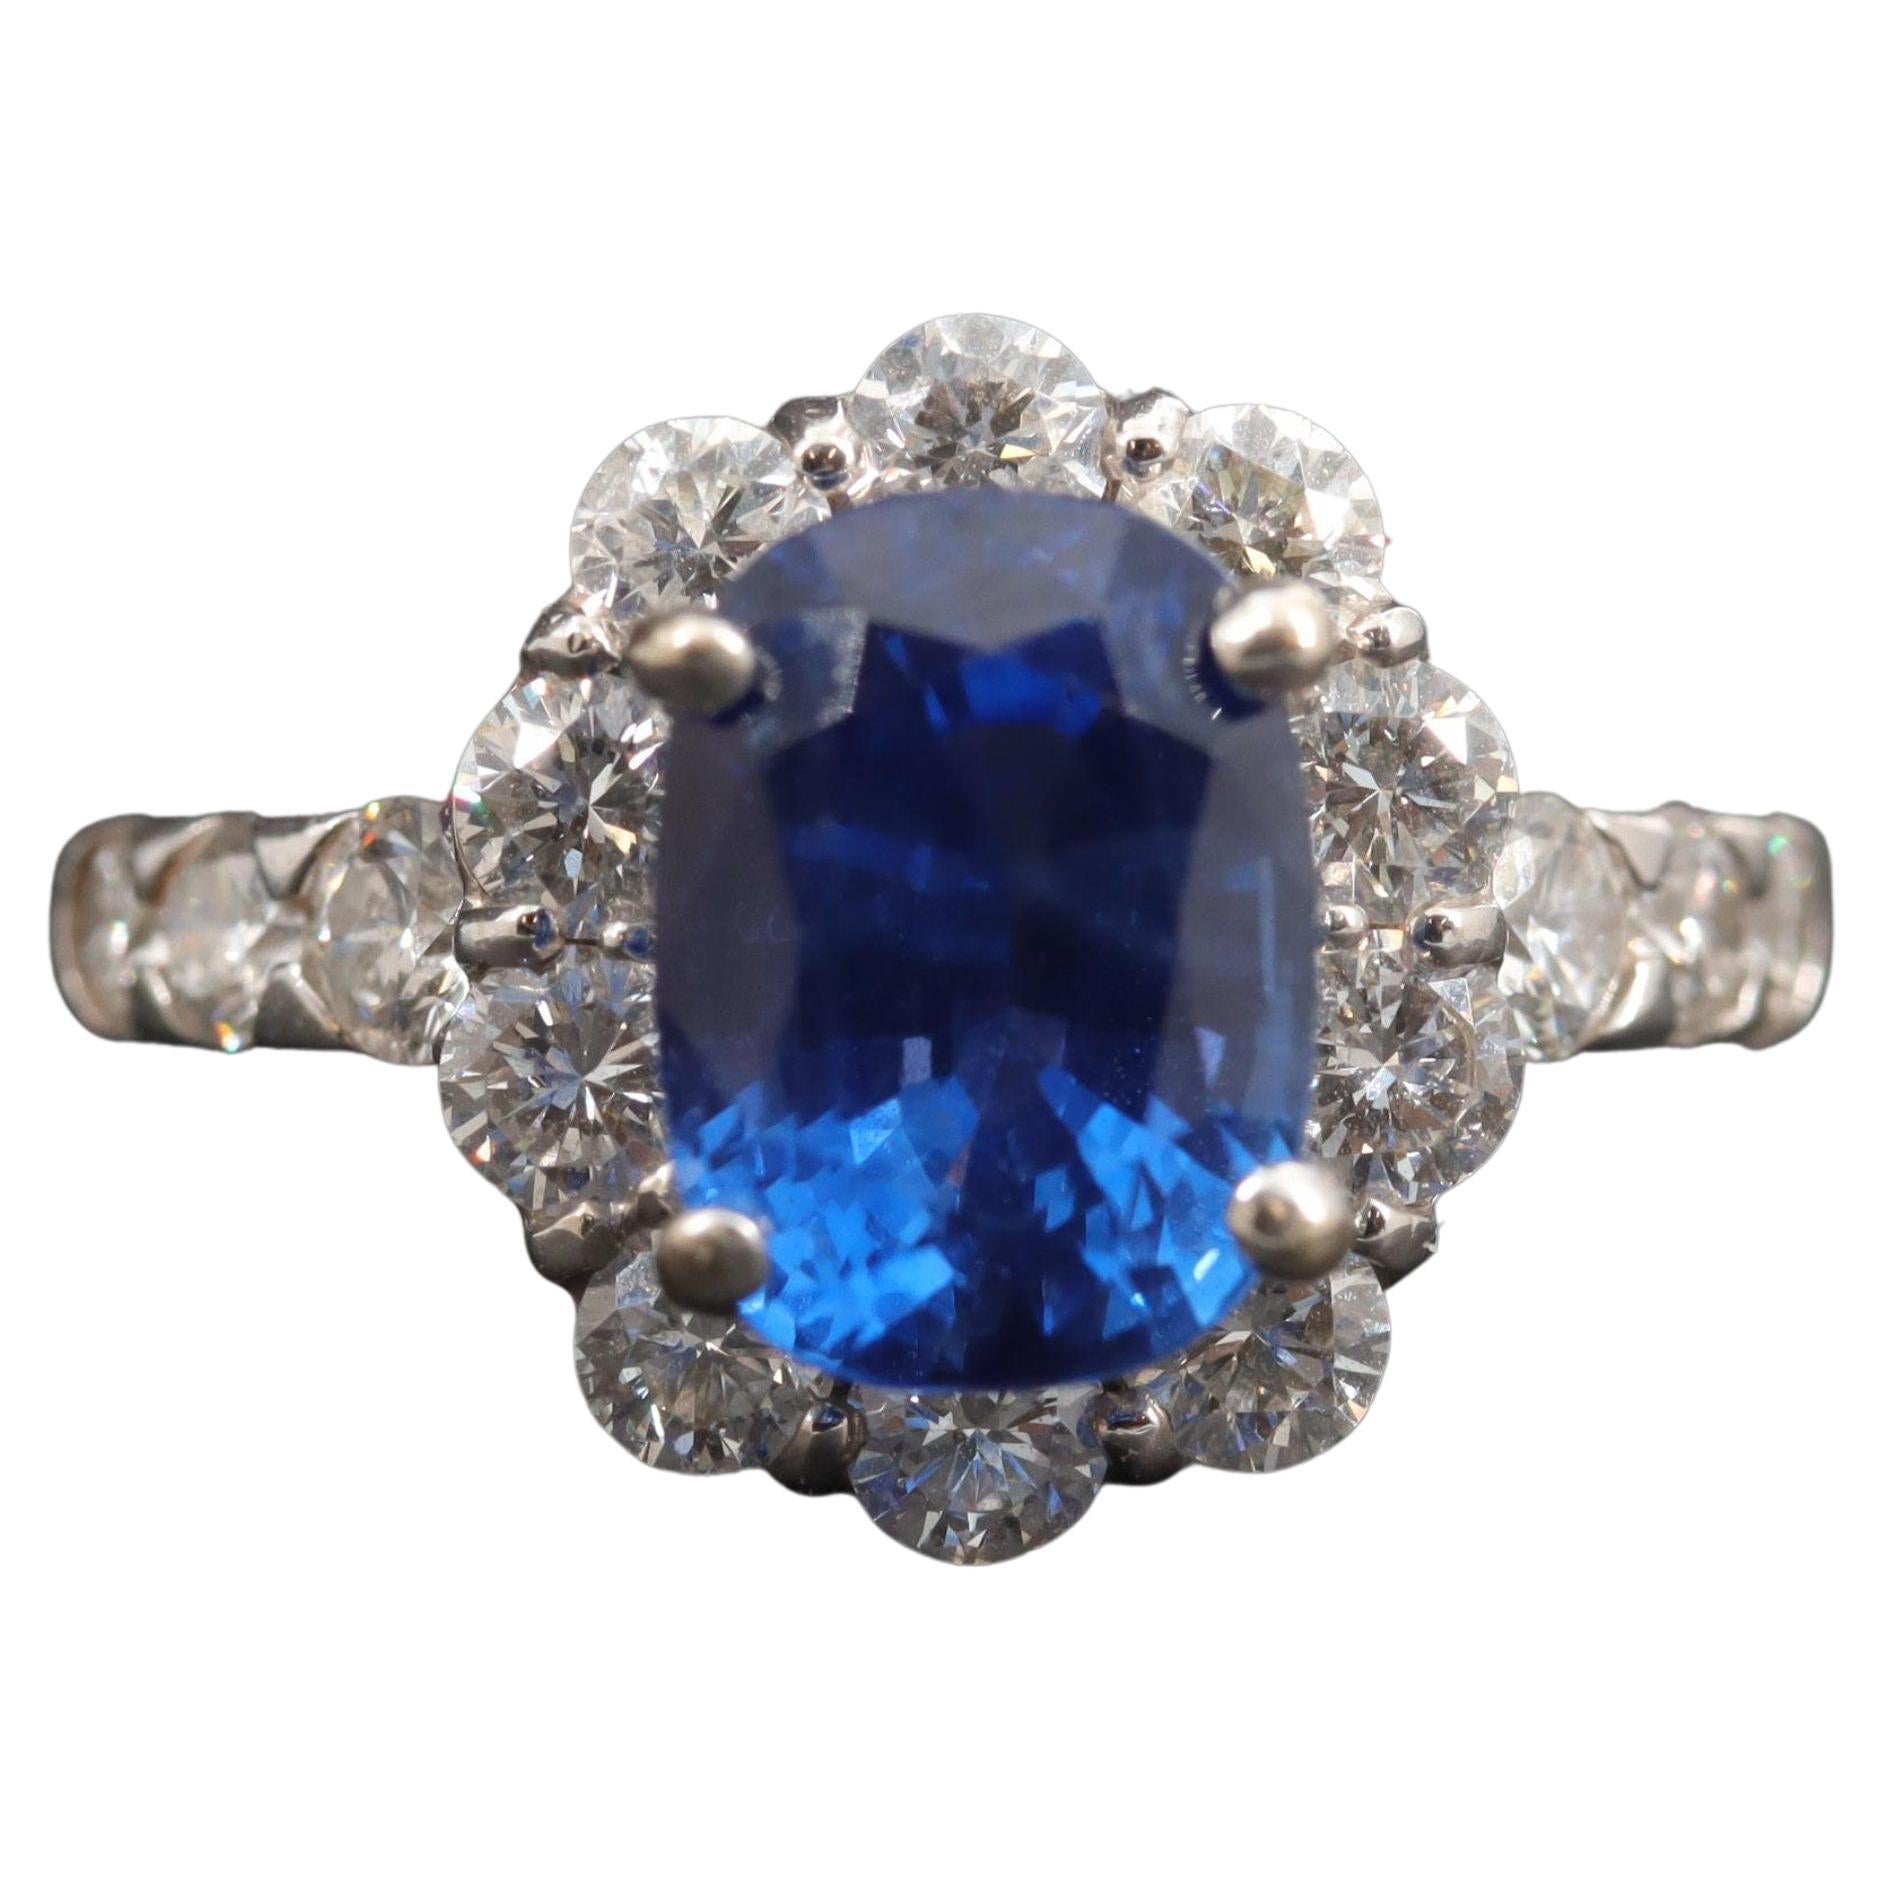 For Sale:  2.9 Carat Sapphire and Diamond Engagement Ring White Gold Sapphire Cocktail Ring